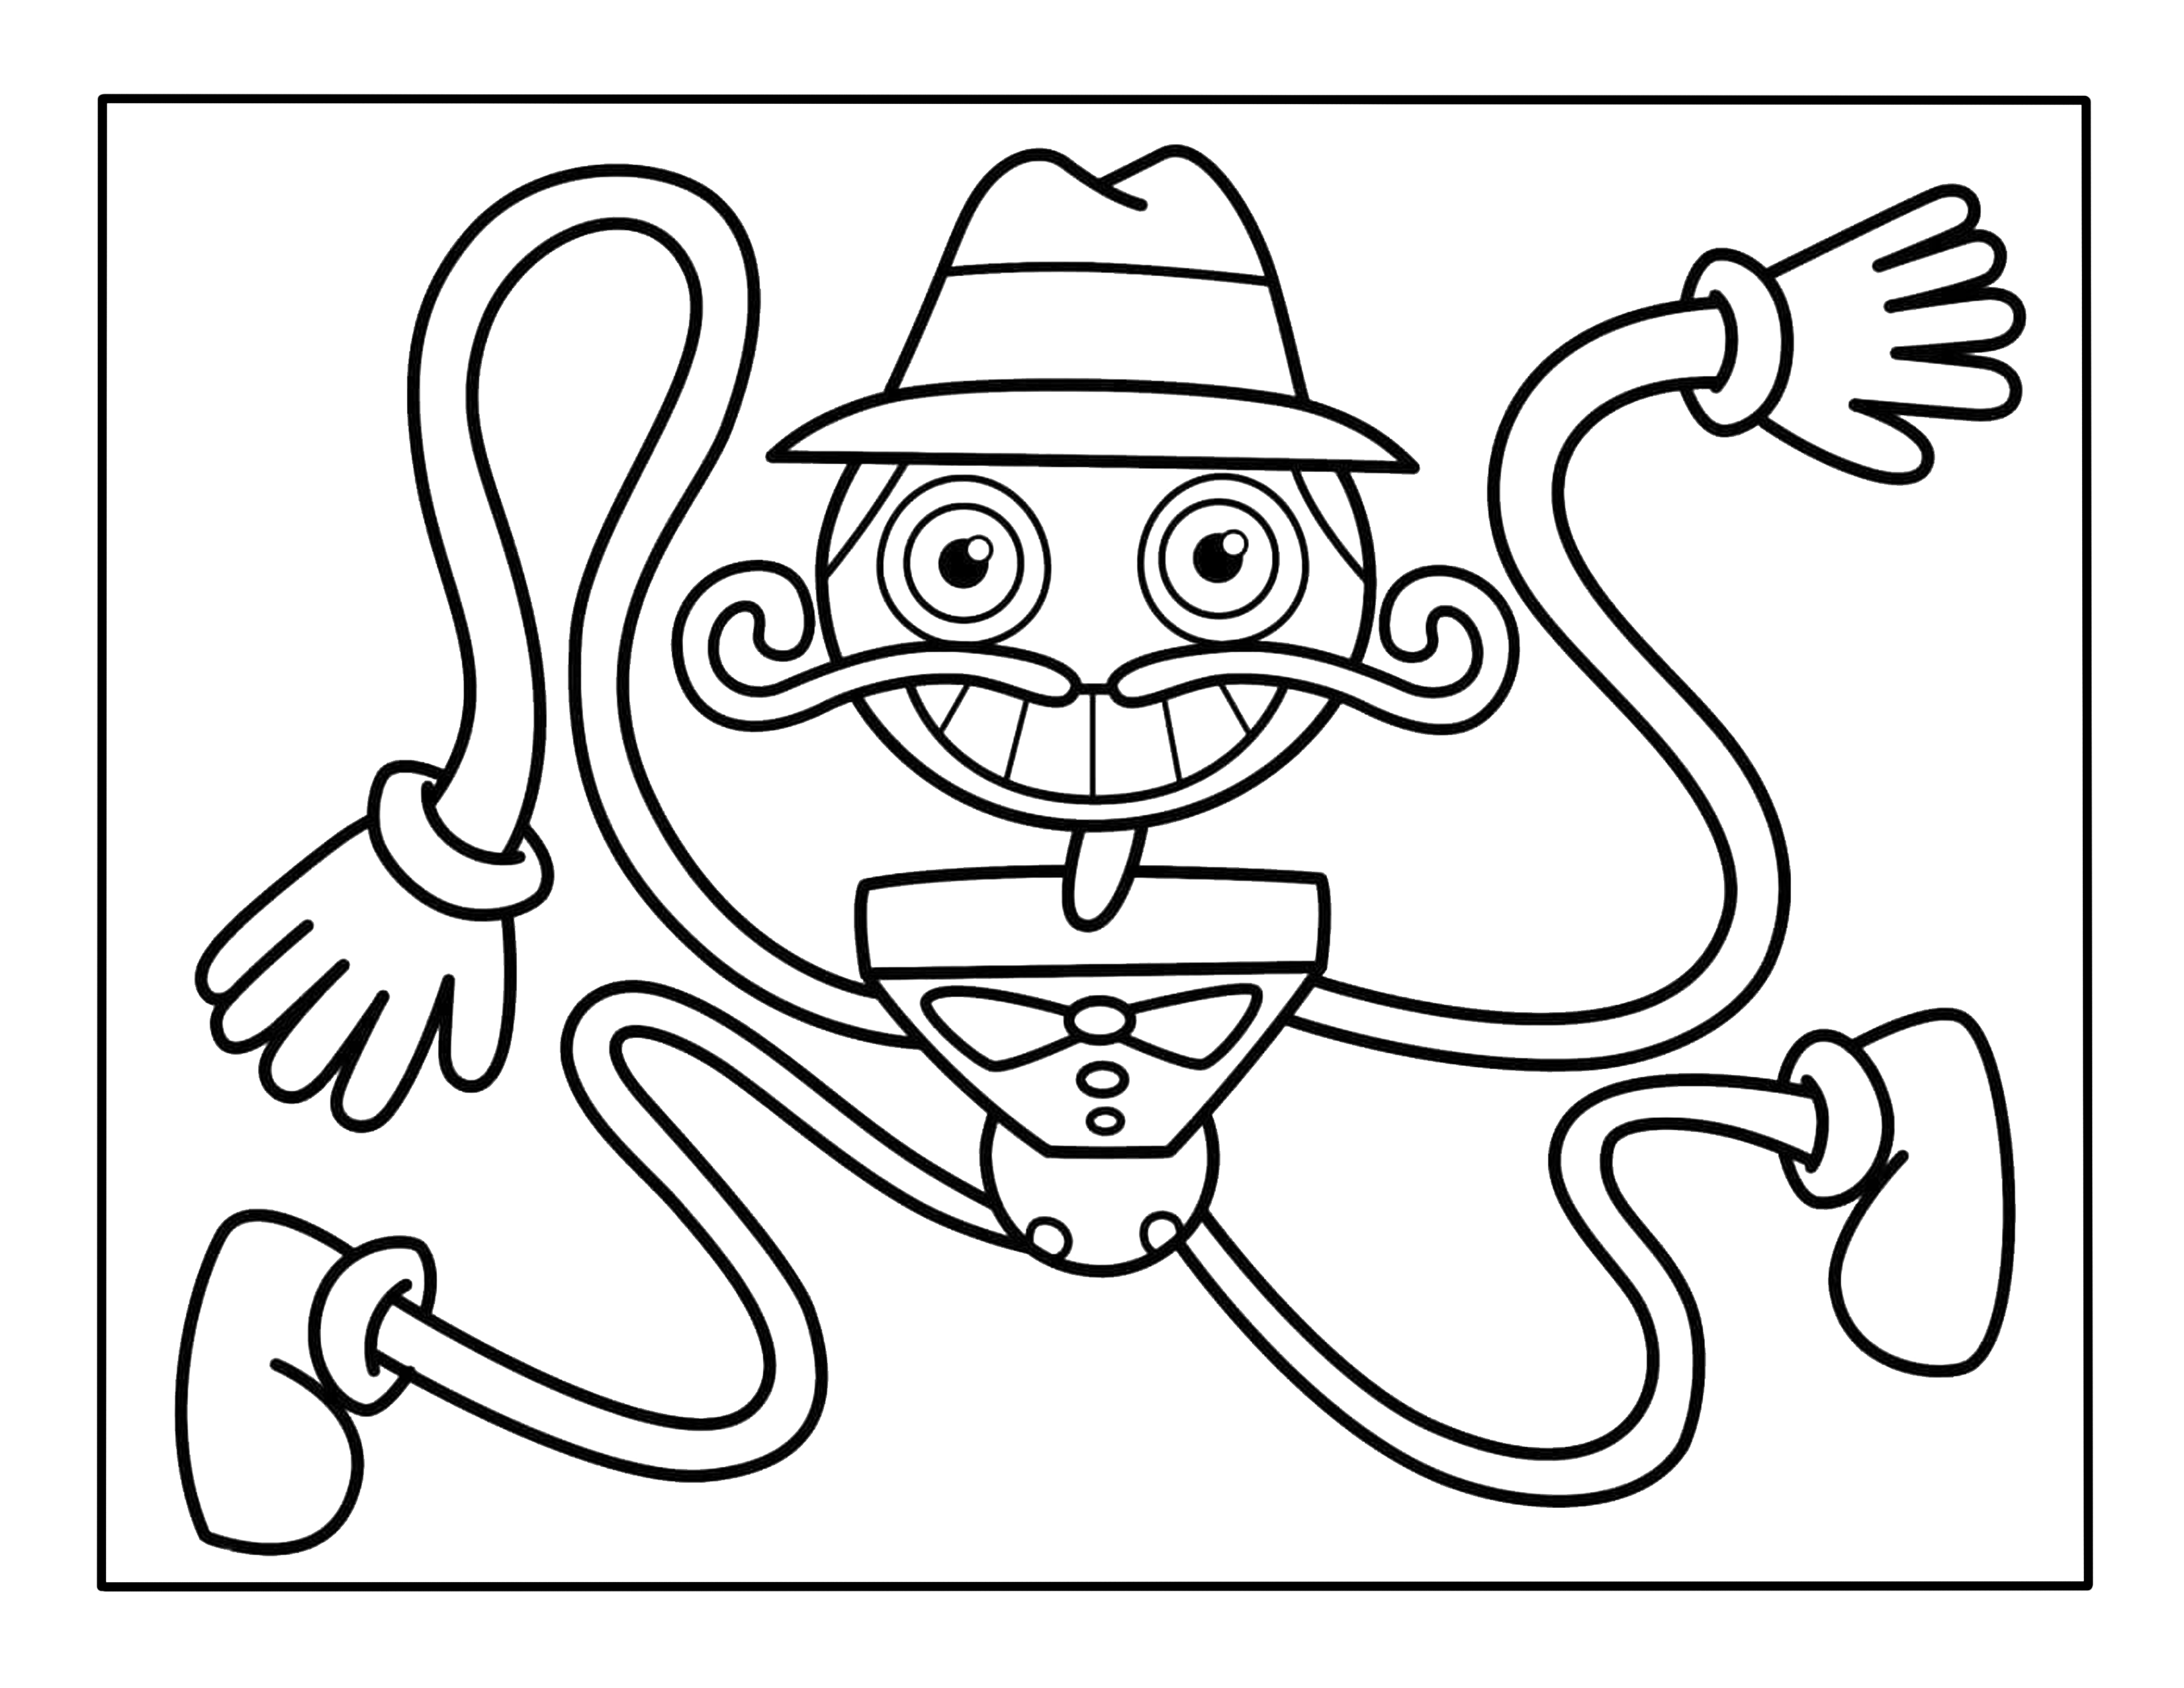 Daddy long legs coloring page â kimmi the clown